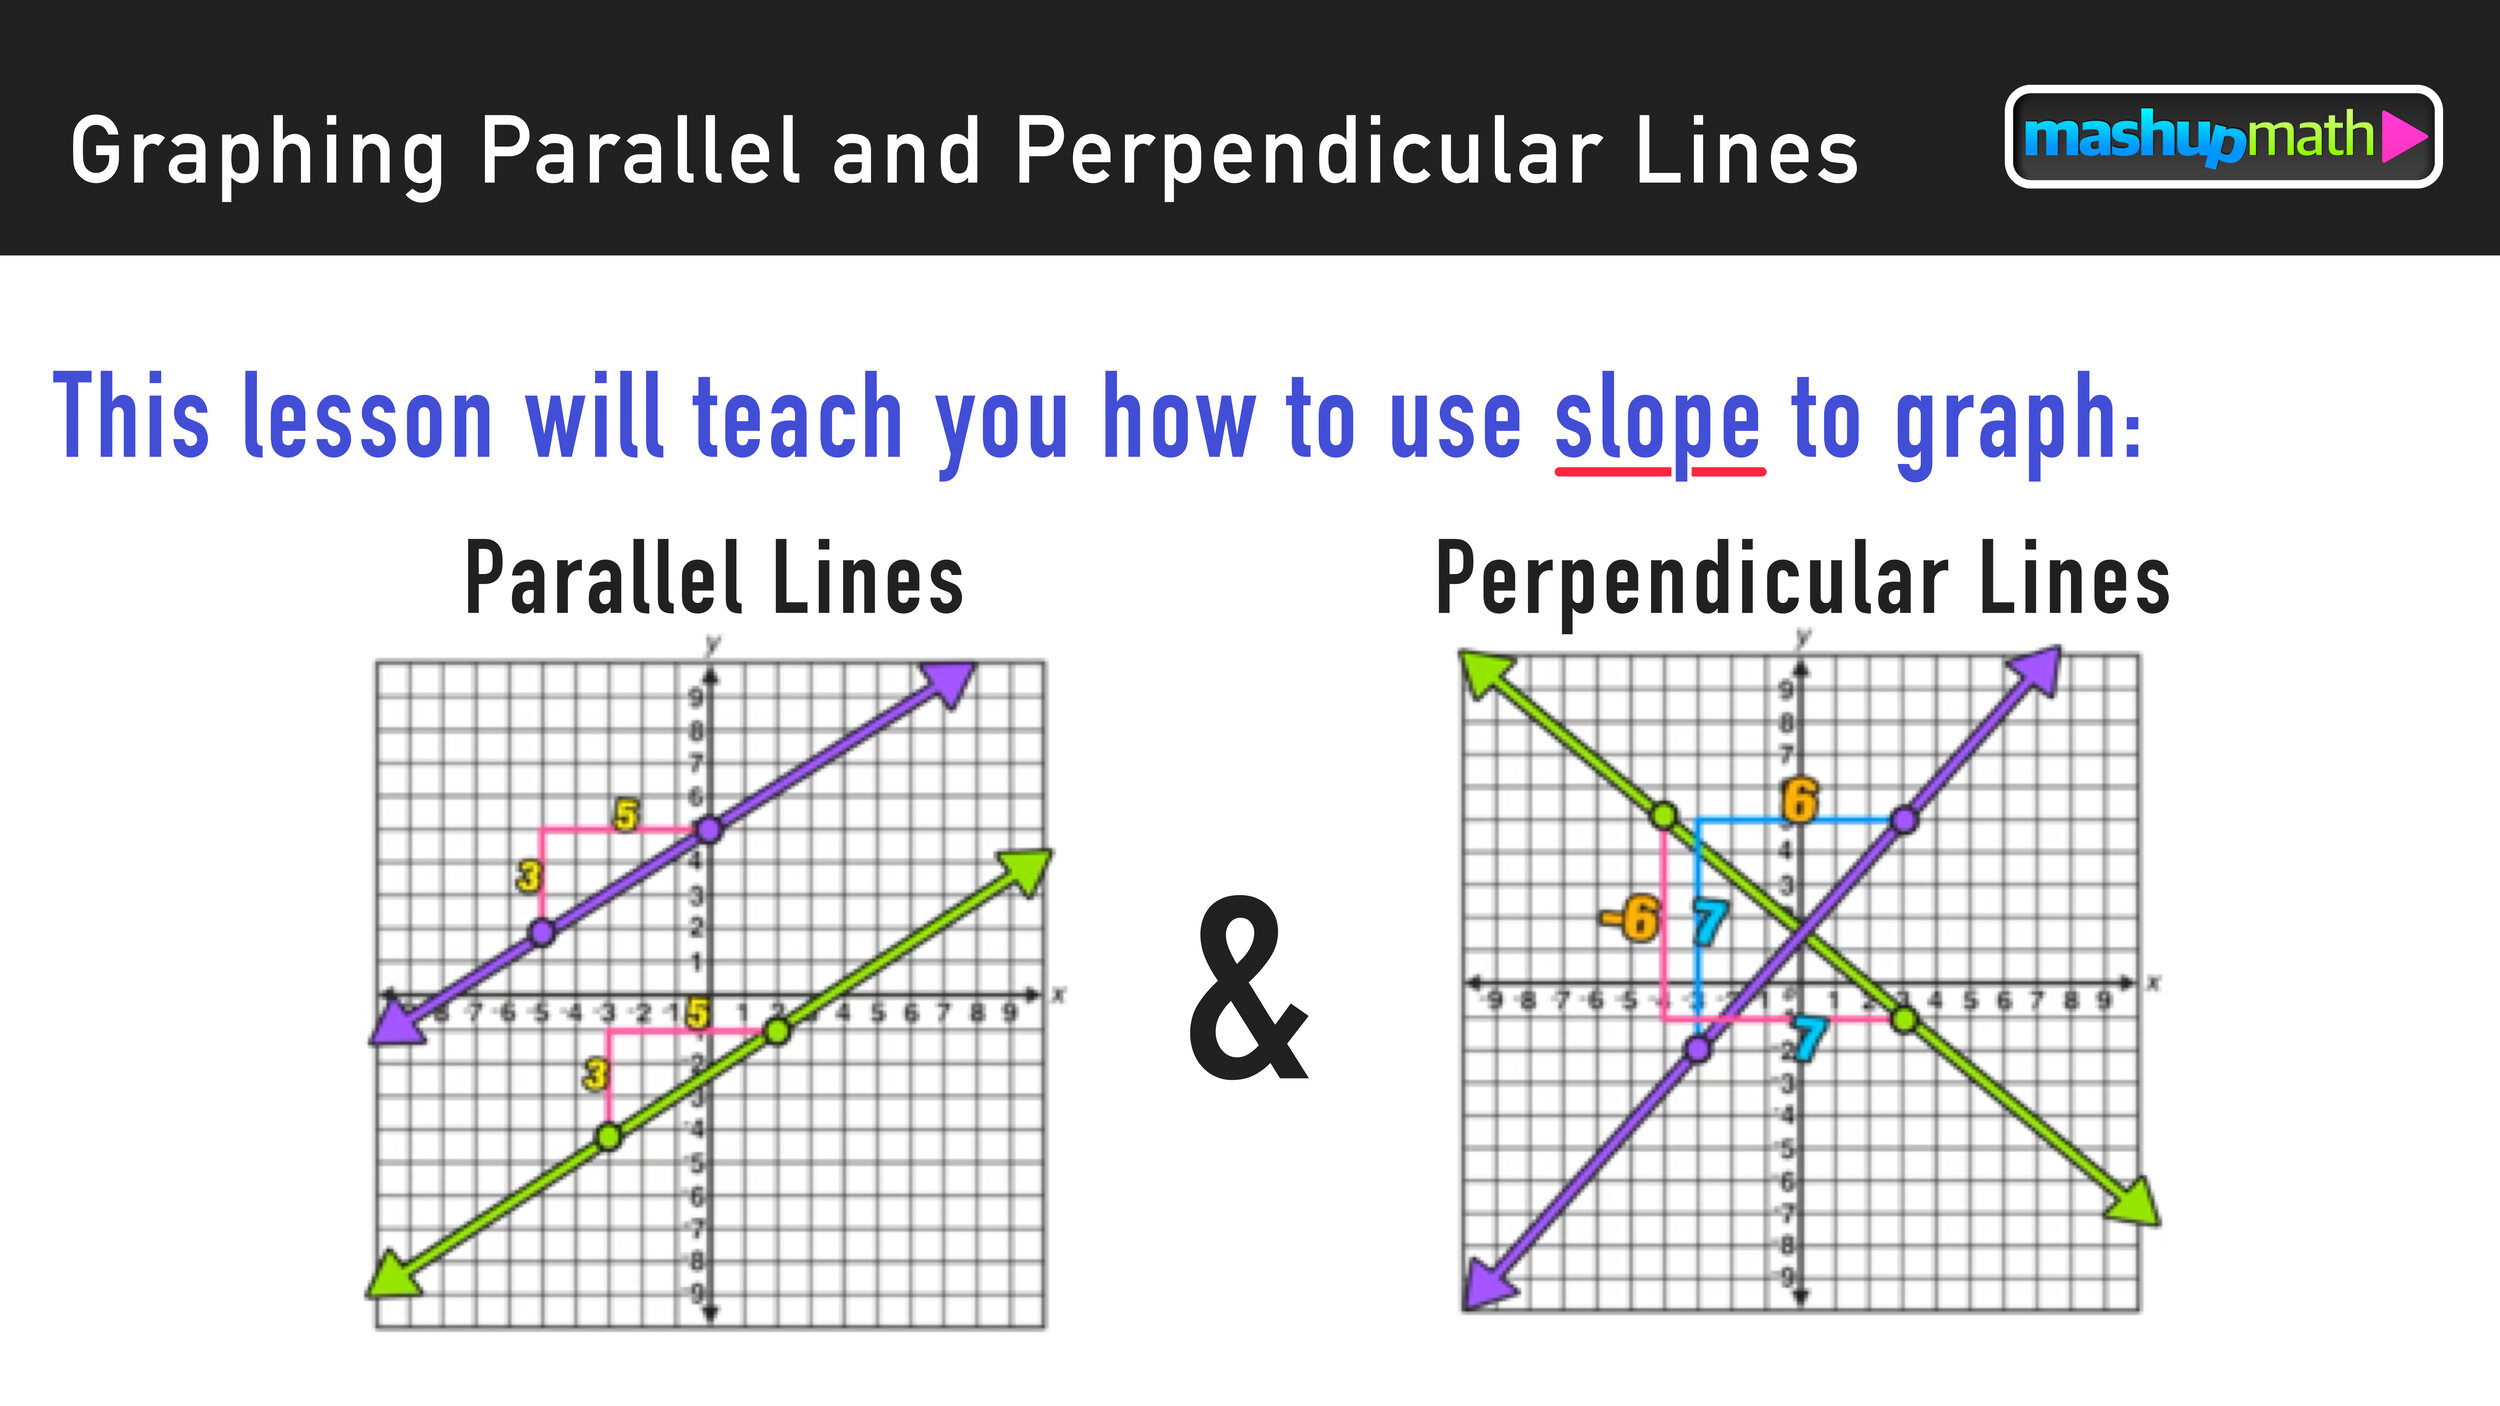 parallel-slopes-and-perpendicular-slopes-complete-guide-mashup-math